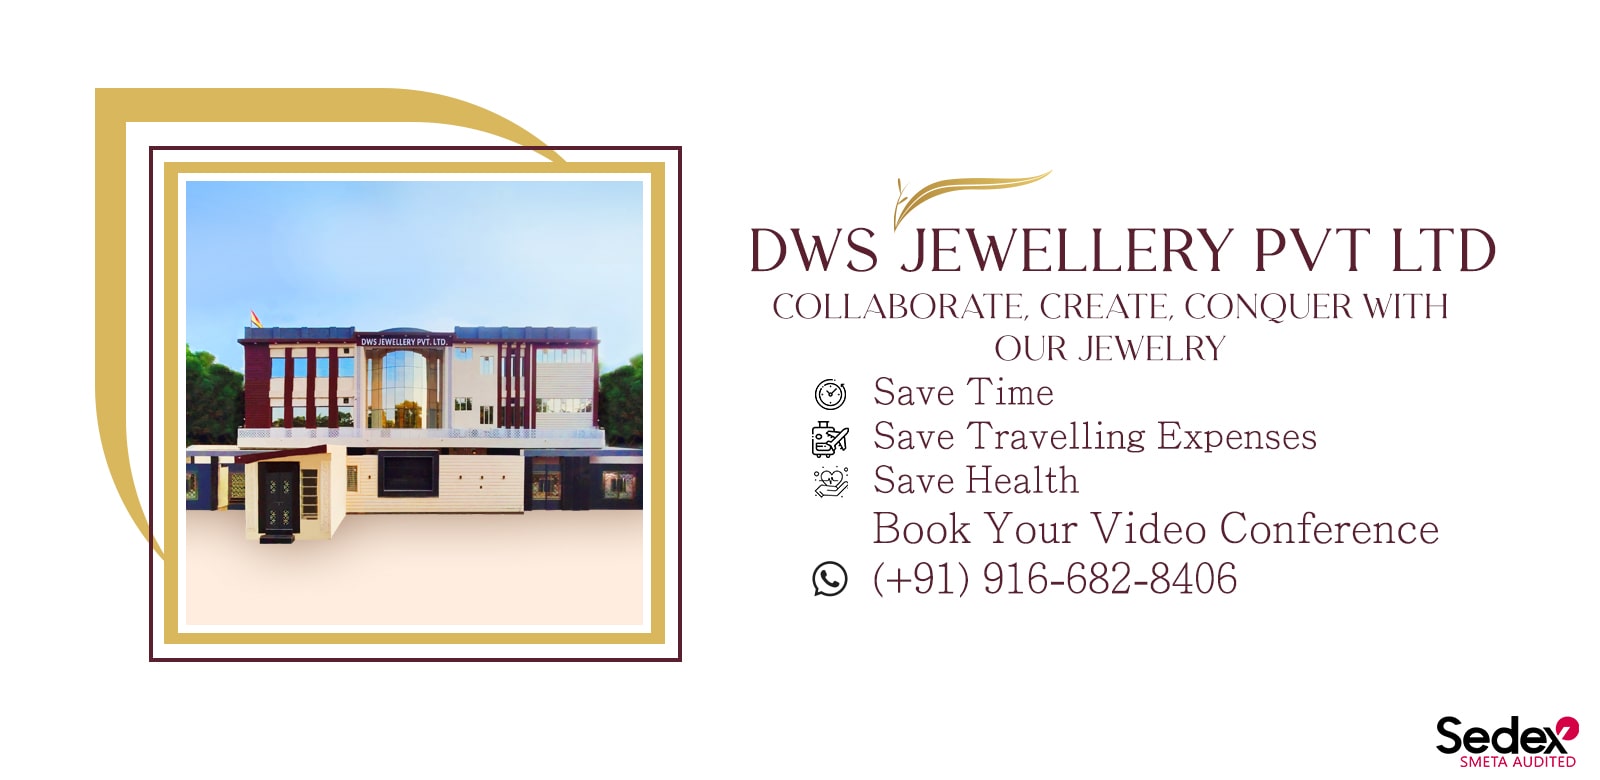 DWS Jewellery: Collaborate, Create, and Conquer with Our Jewelry